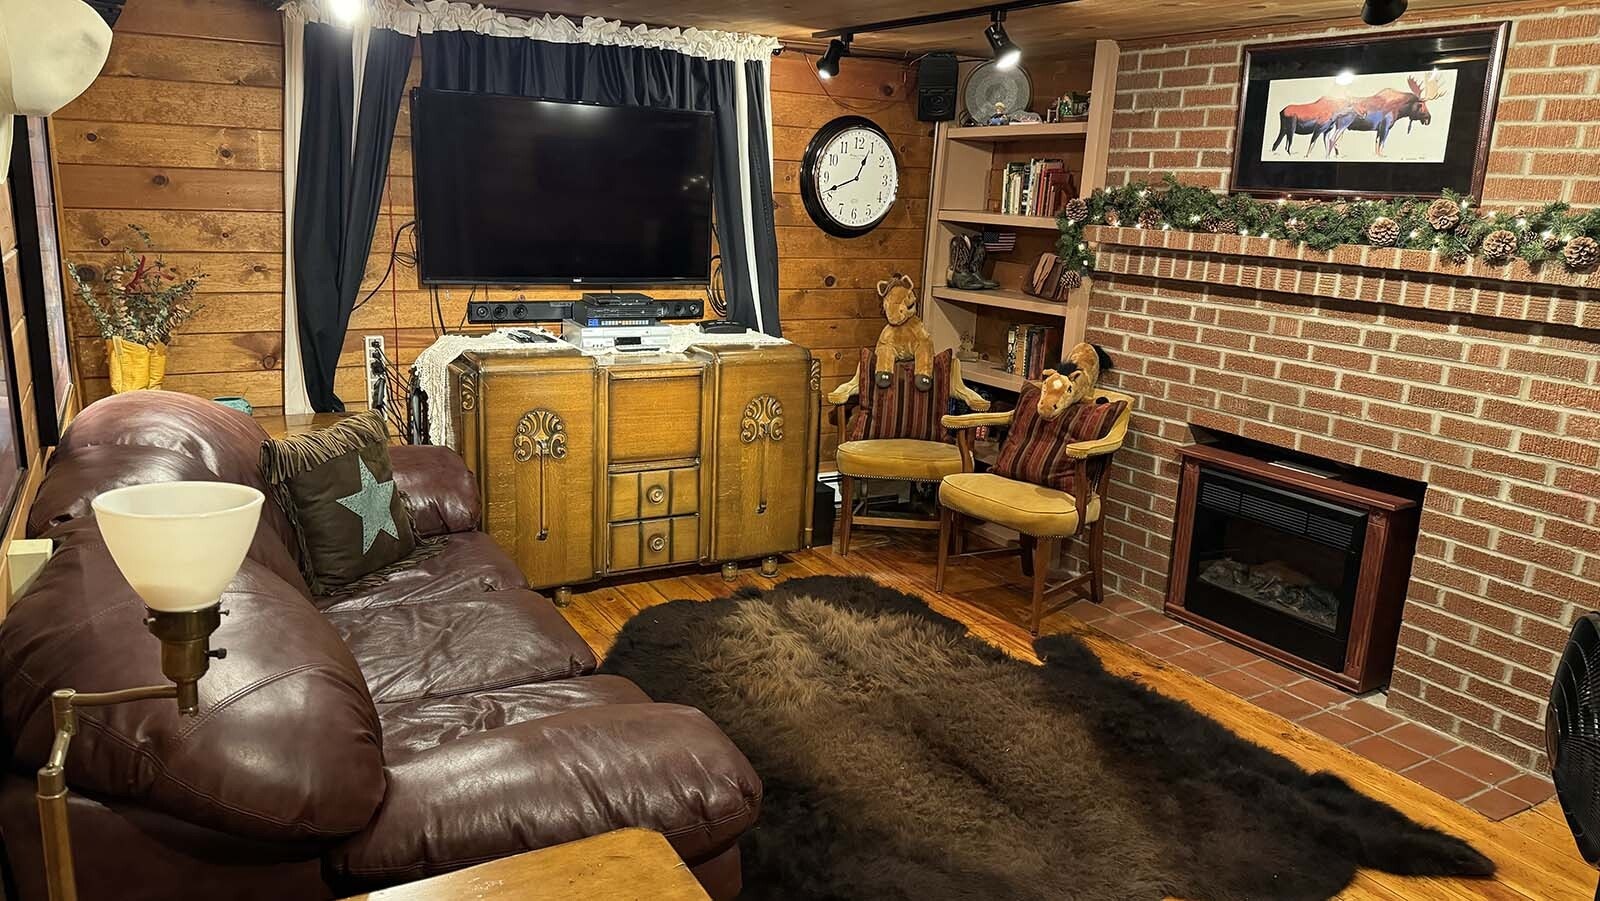 A leather couch and period sideboard cabinet.